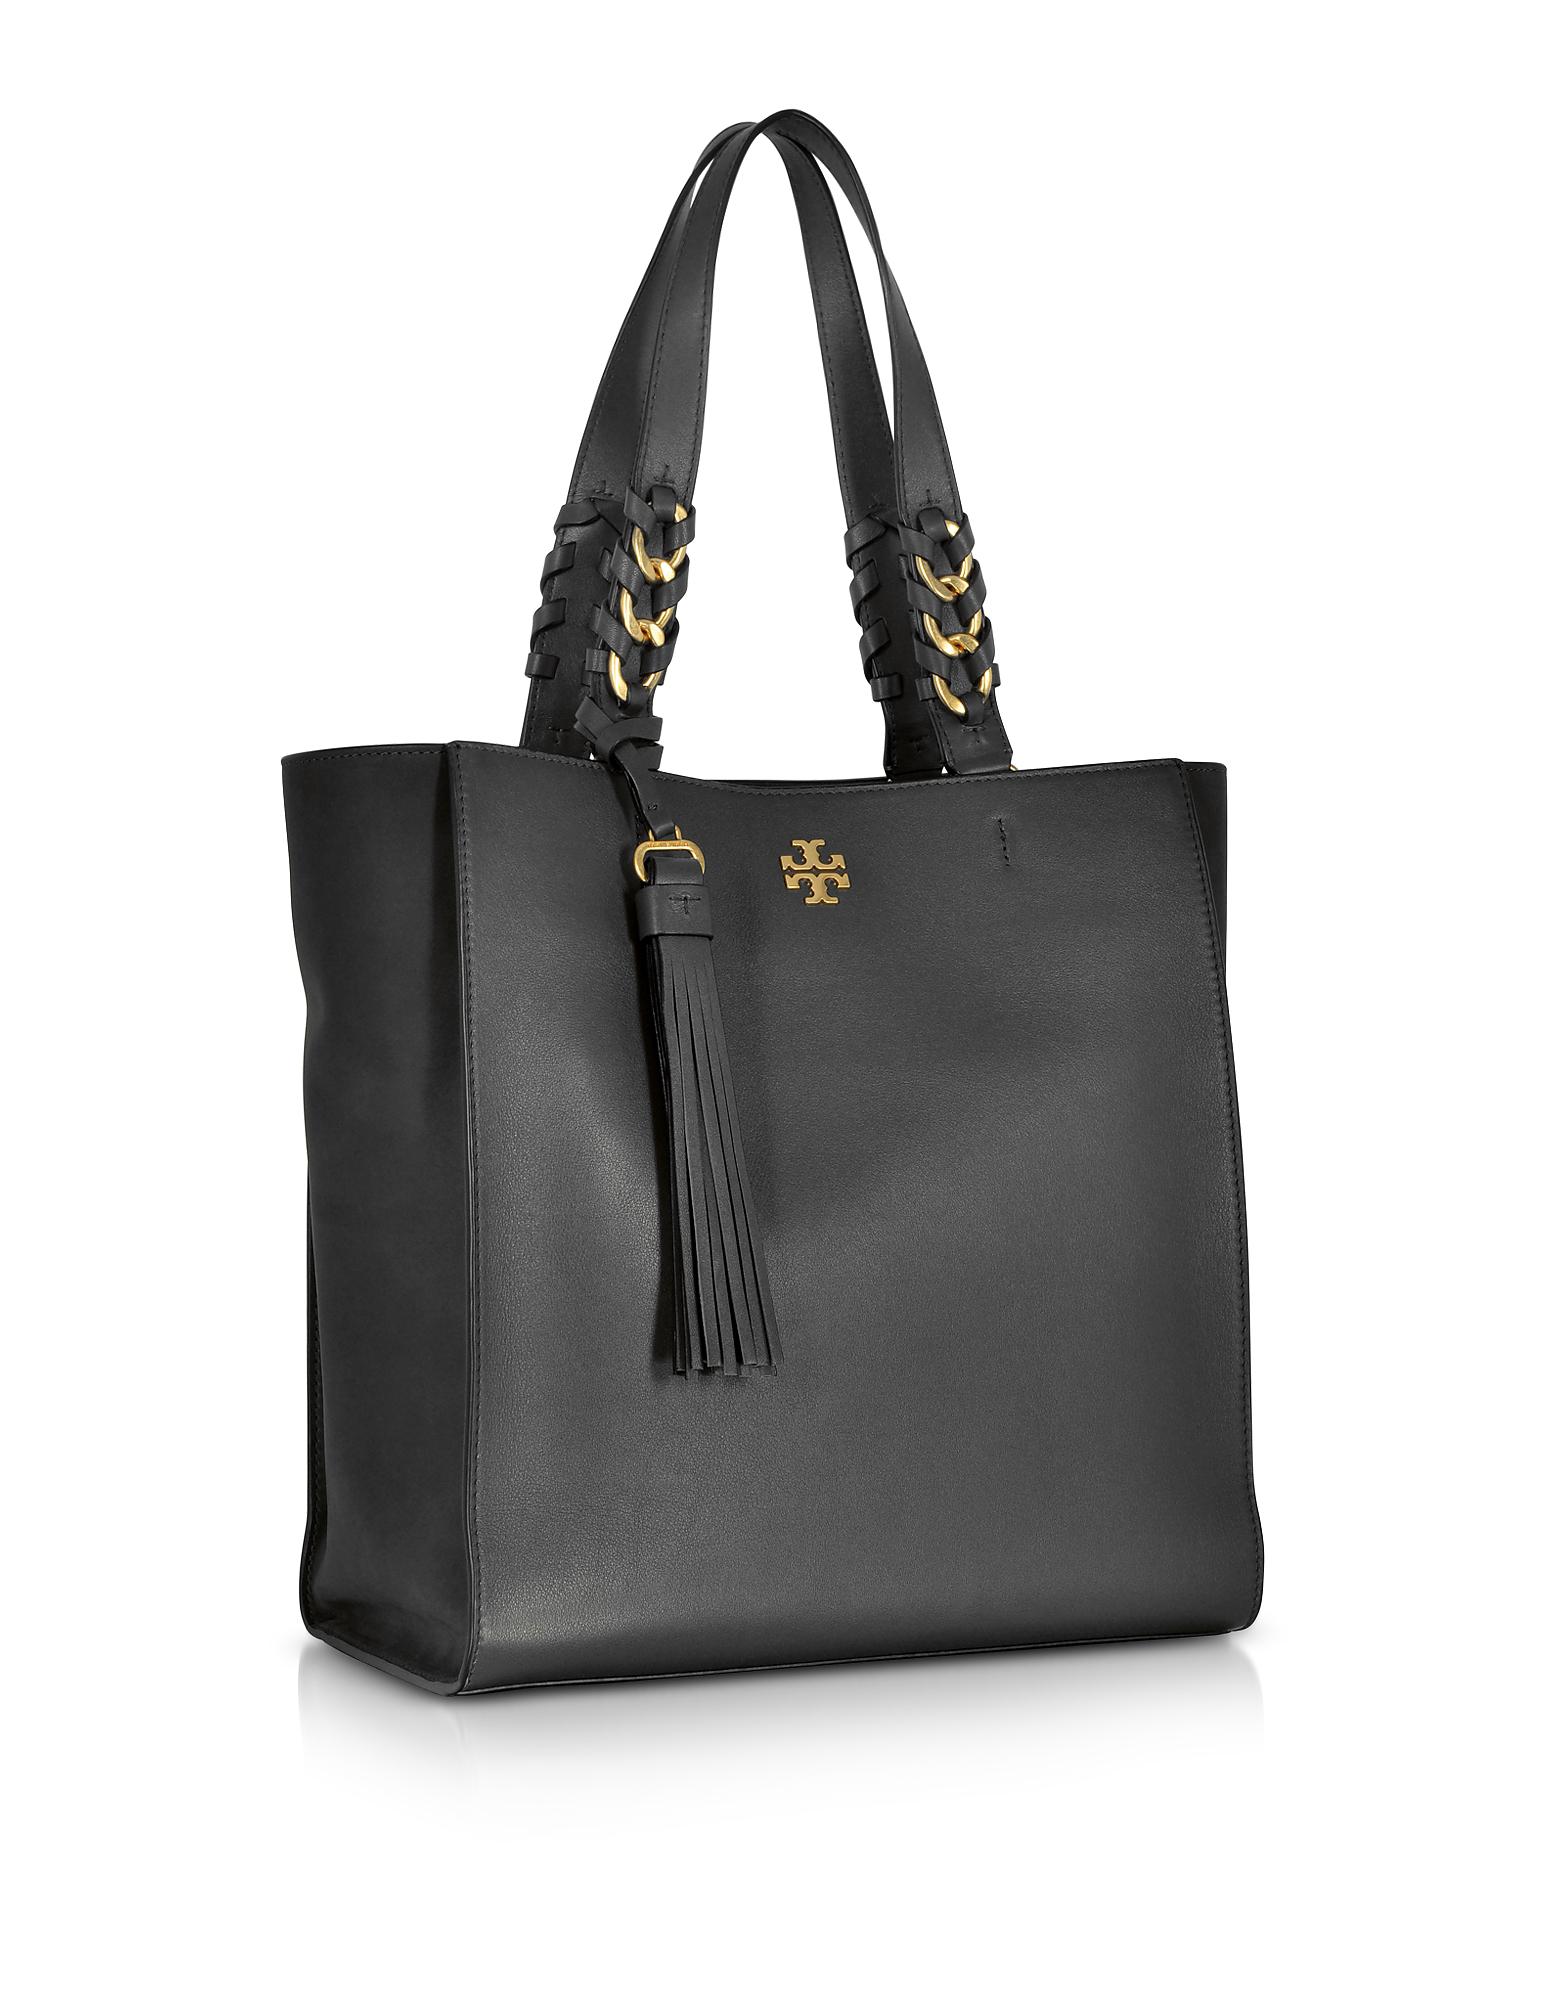 Tory Burch Brooke Black Leather Tote Bag W/suede Trims - Lyst